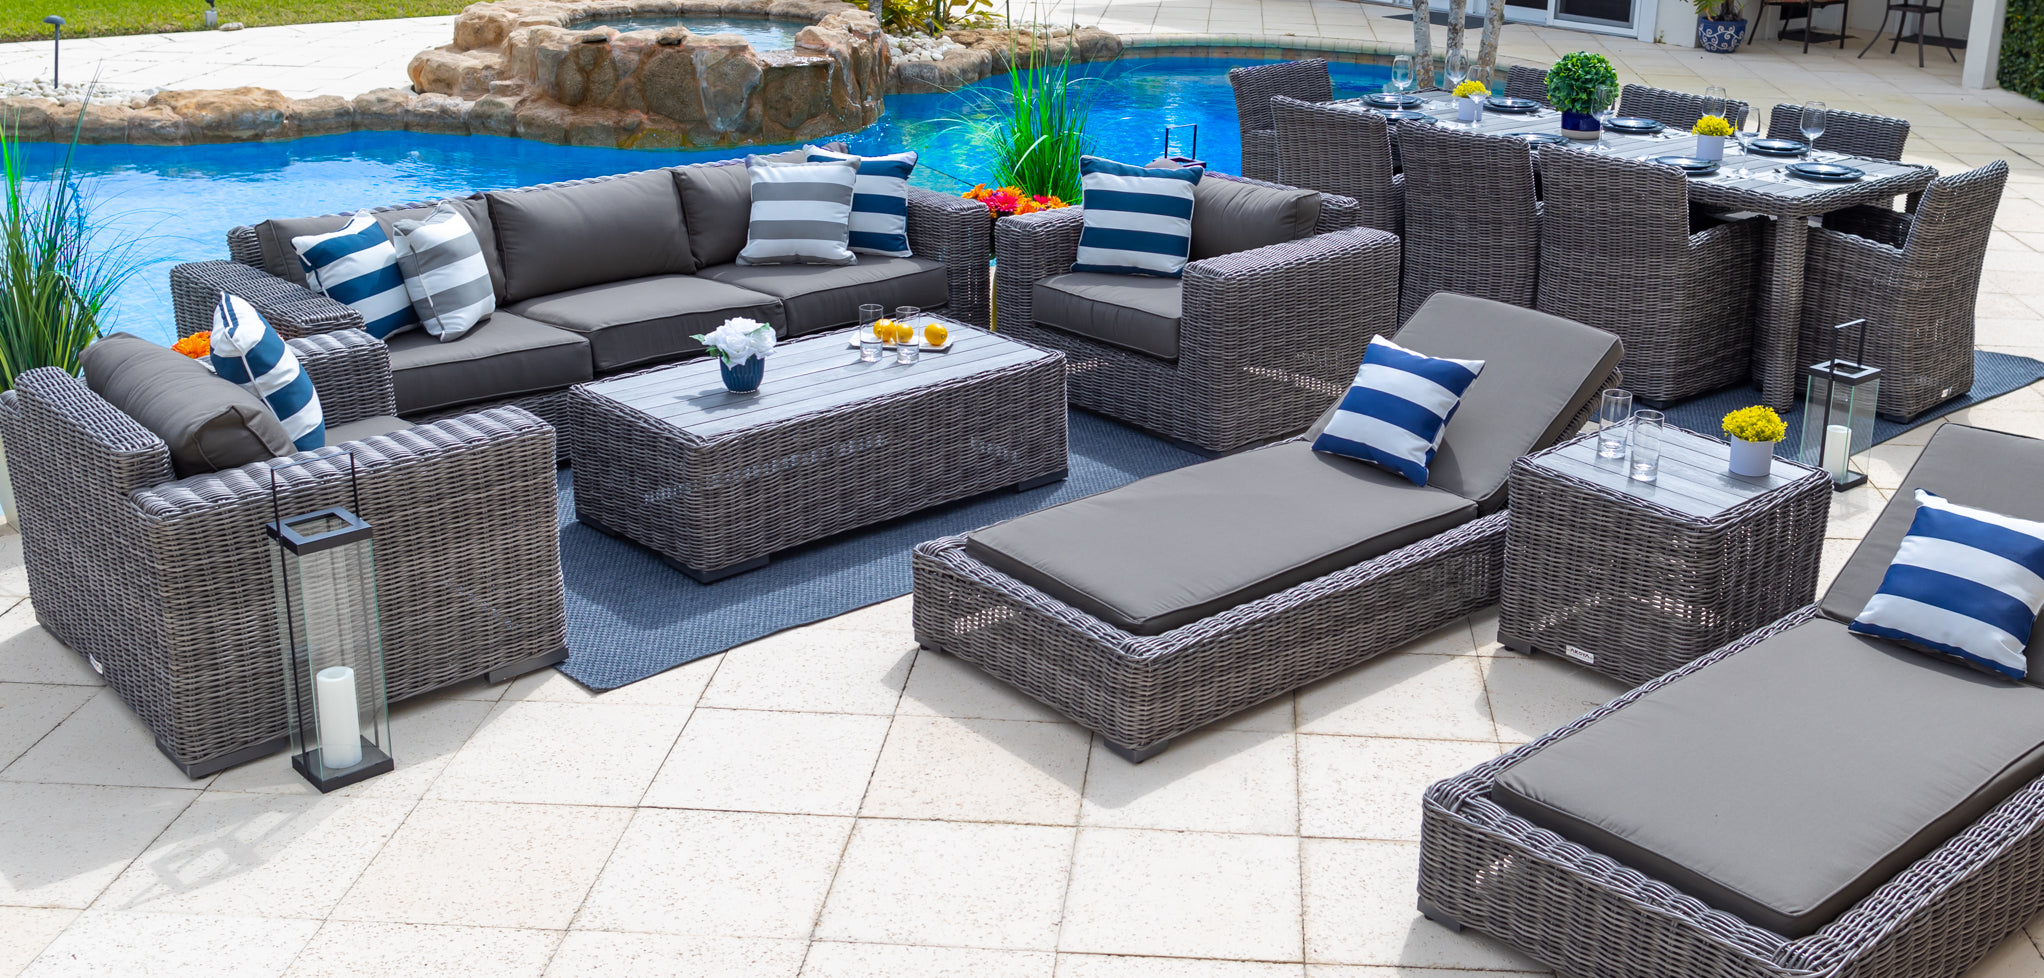 Pool Patio Furniture should be durable, low maintenance and elegant